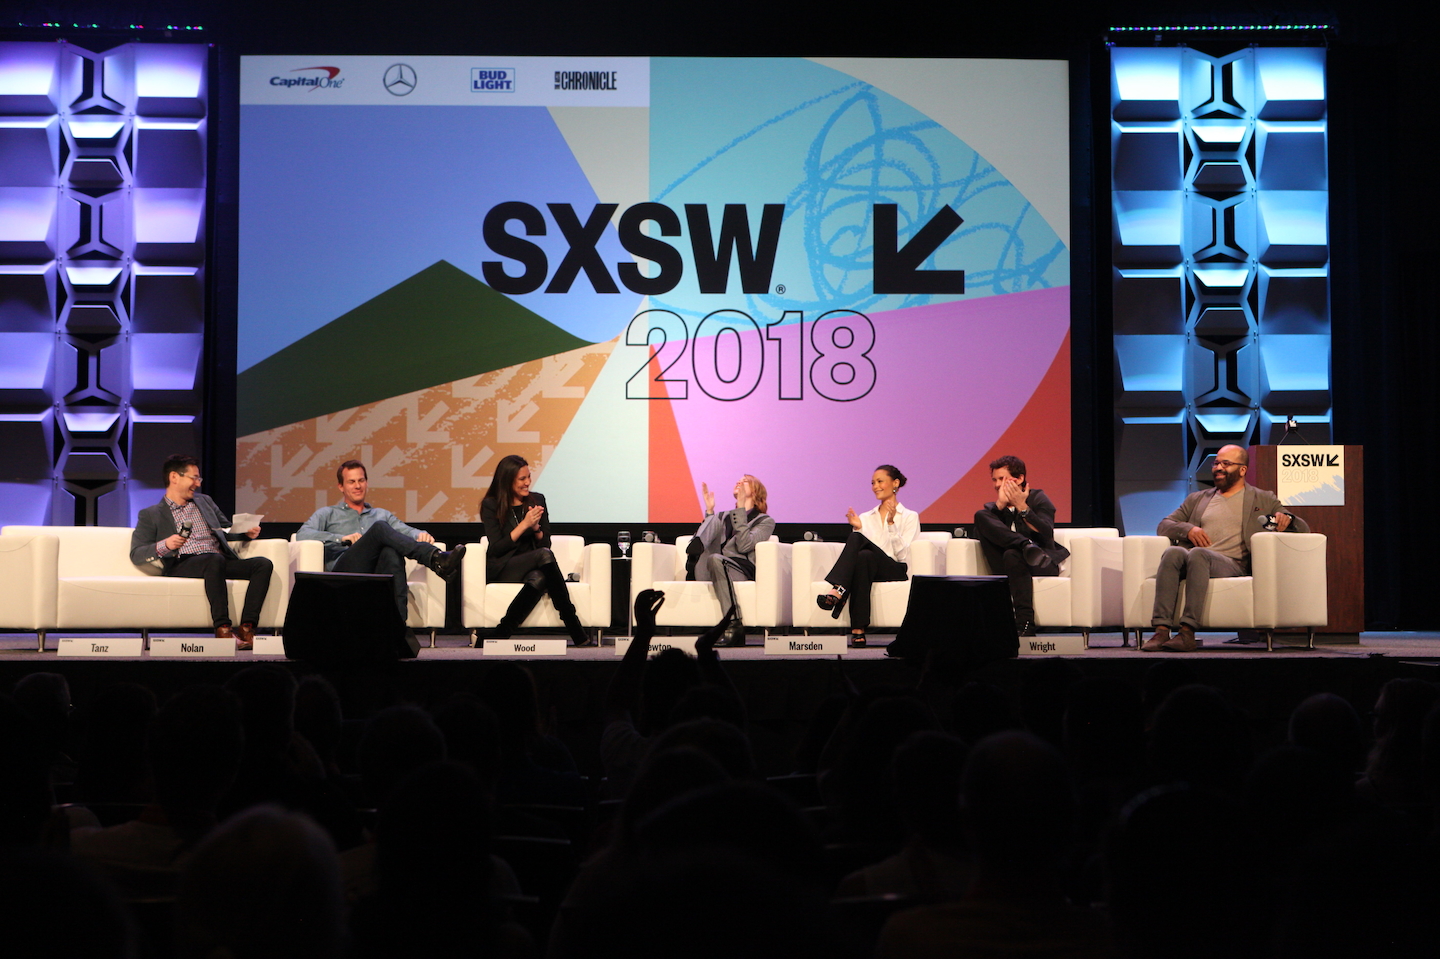 A Featured Session in the Entertainment Influencers track convened a panel consisting of Westworld’s showrunners and cast members. Photo by Amy E. Price/Getty Images for SXSW